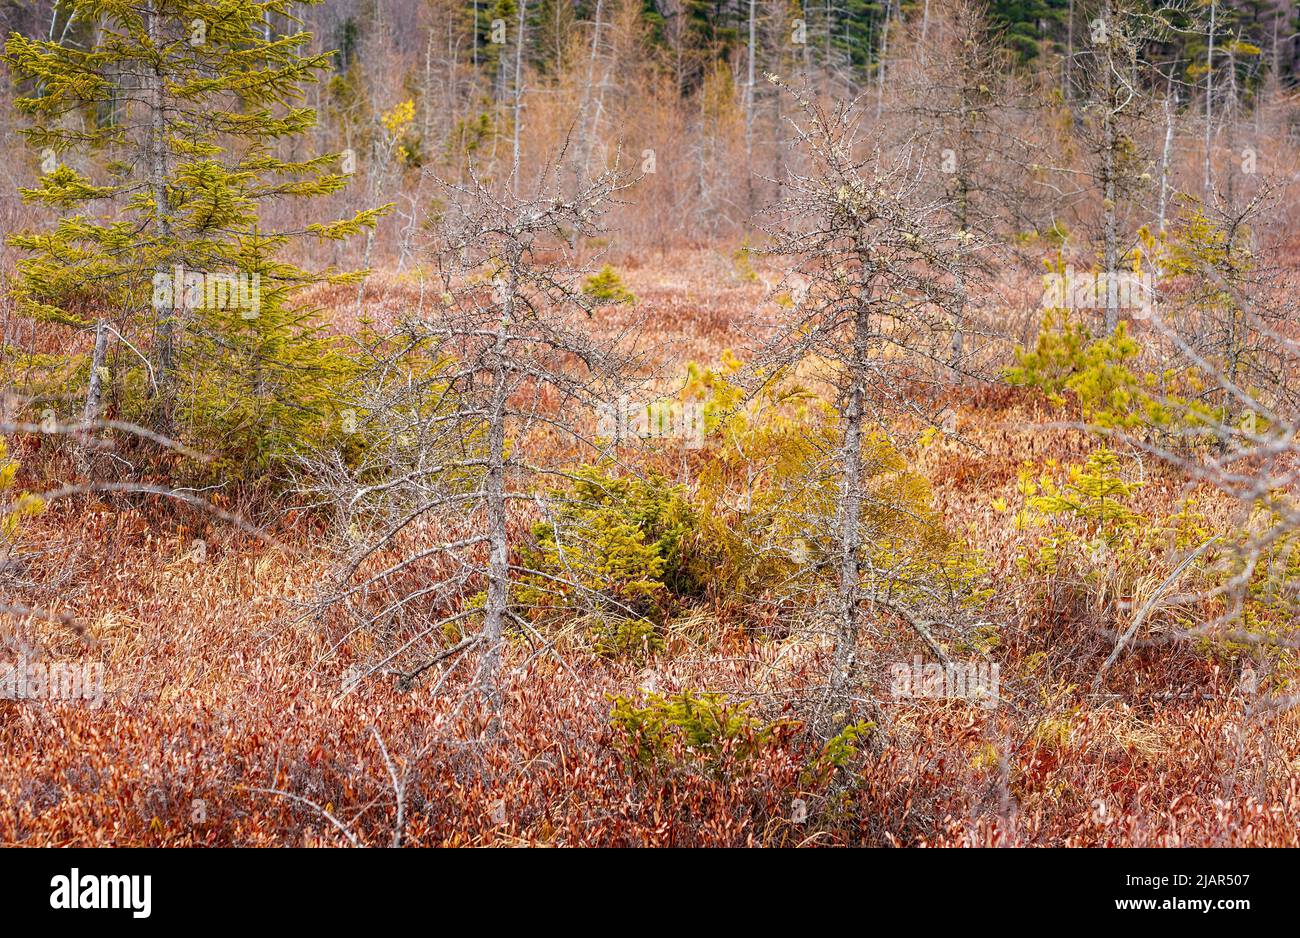 Marsh vegetation: larch, black spruce and pine trees, amidst leatherleaf shrubs. The trees are stunted due the low nutrients in the acidic bog peat. Stock Photo